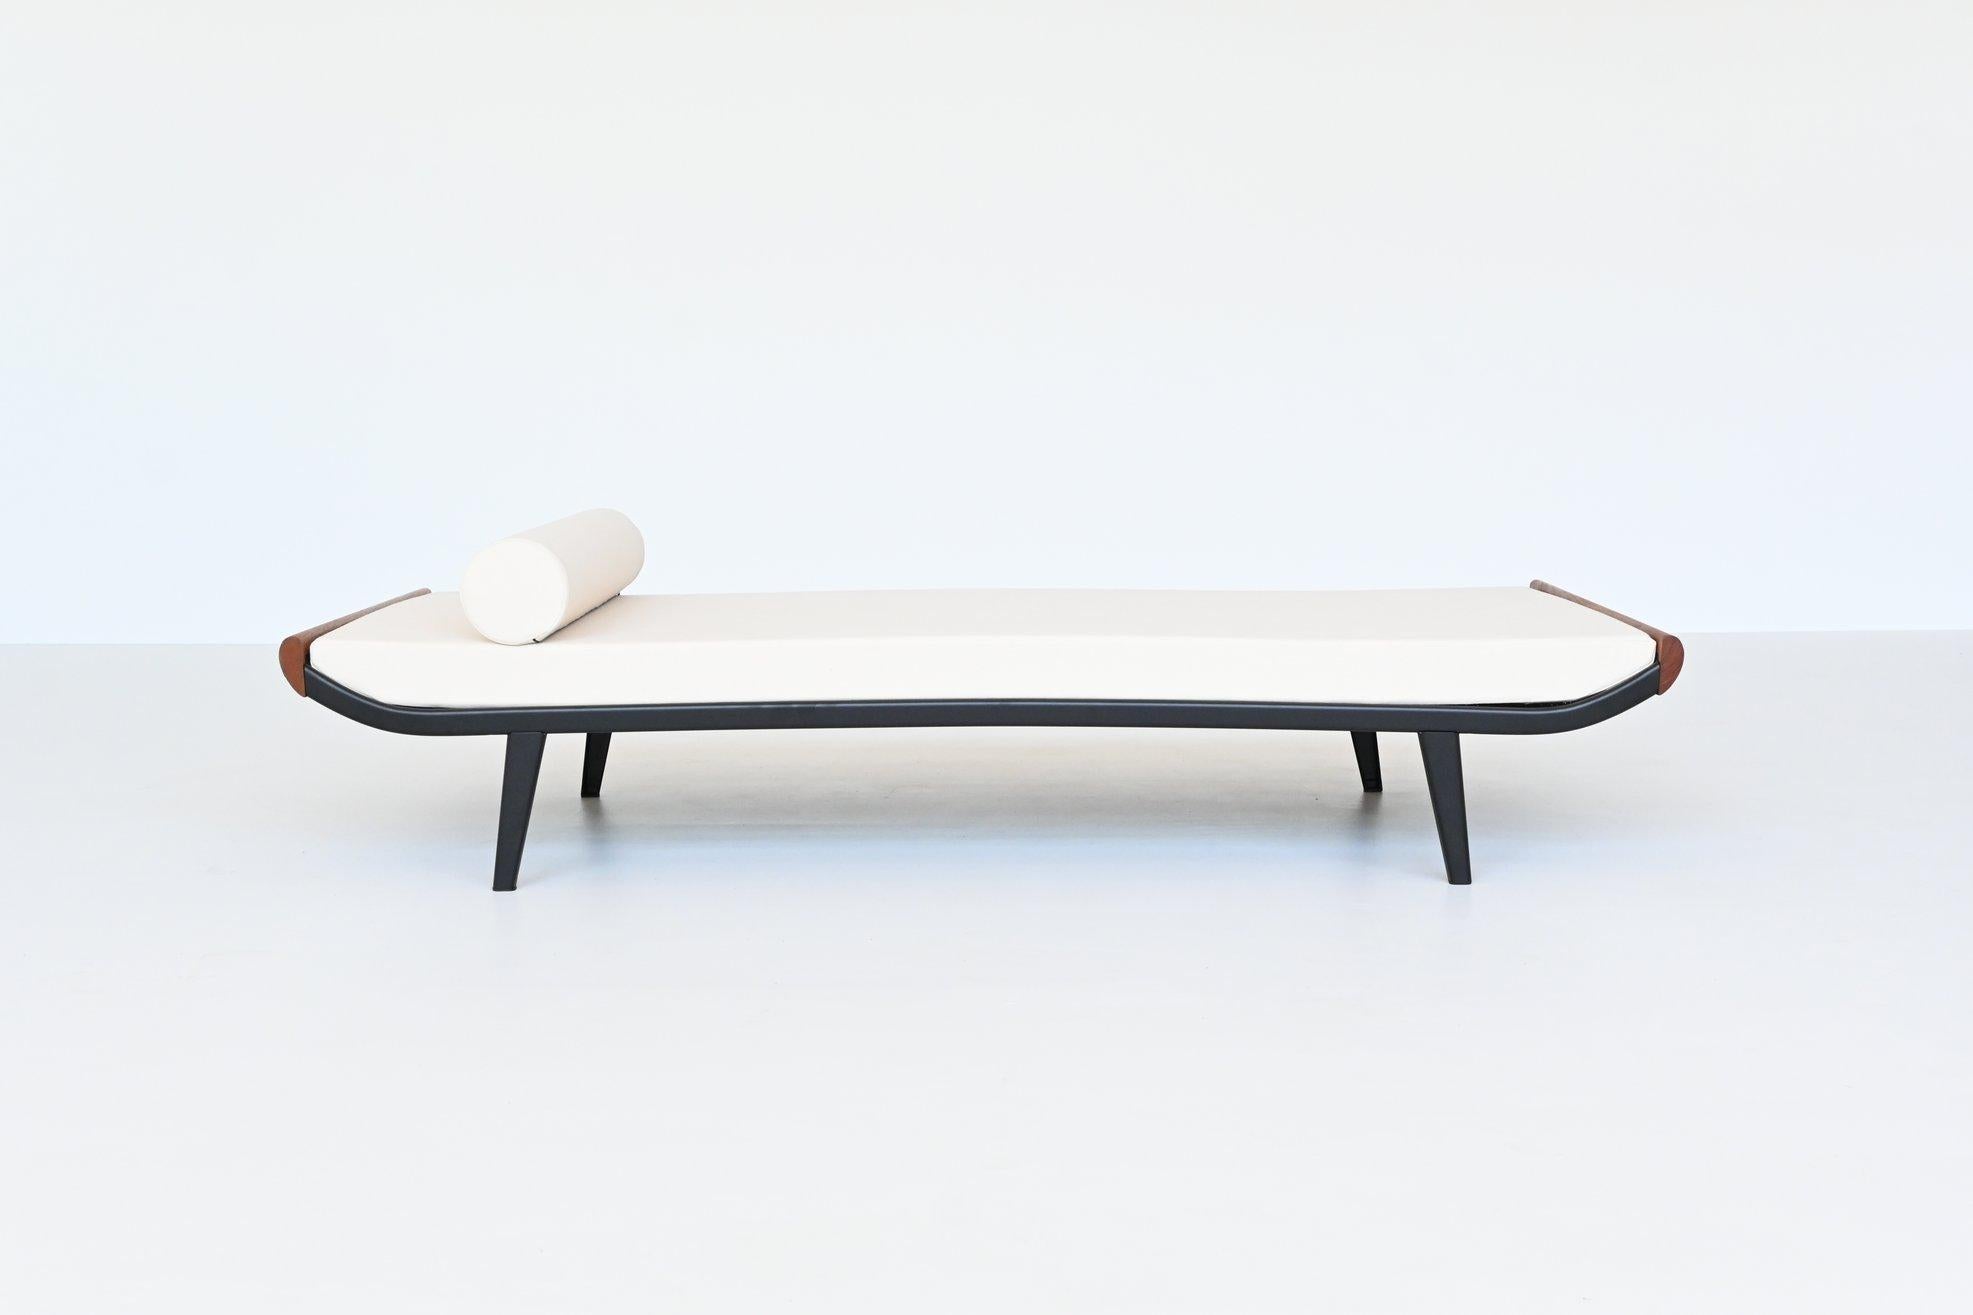 Beautiful and iconic Cleopatra daybed designed by Dick Cordemeijer for Auping, The Netherlands 1954. The frame is made of black coated metal and the ends are in solid teak wood. The mattress is upholstered with high quality off-white linen fabric,